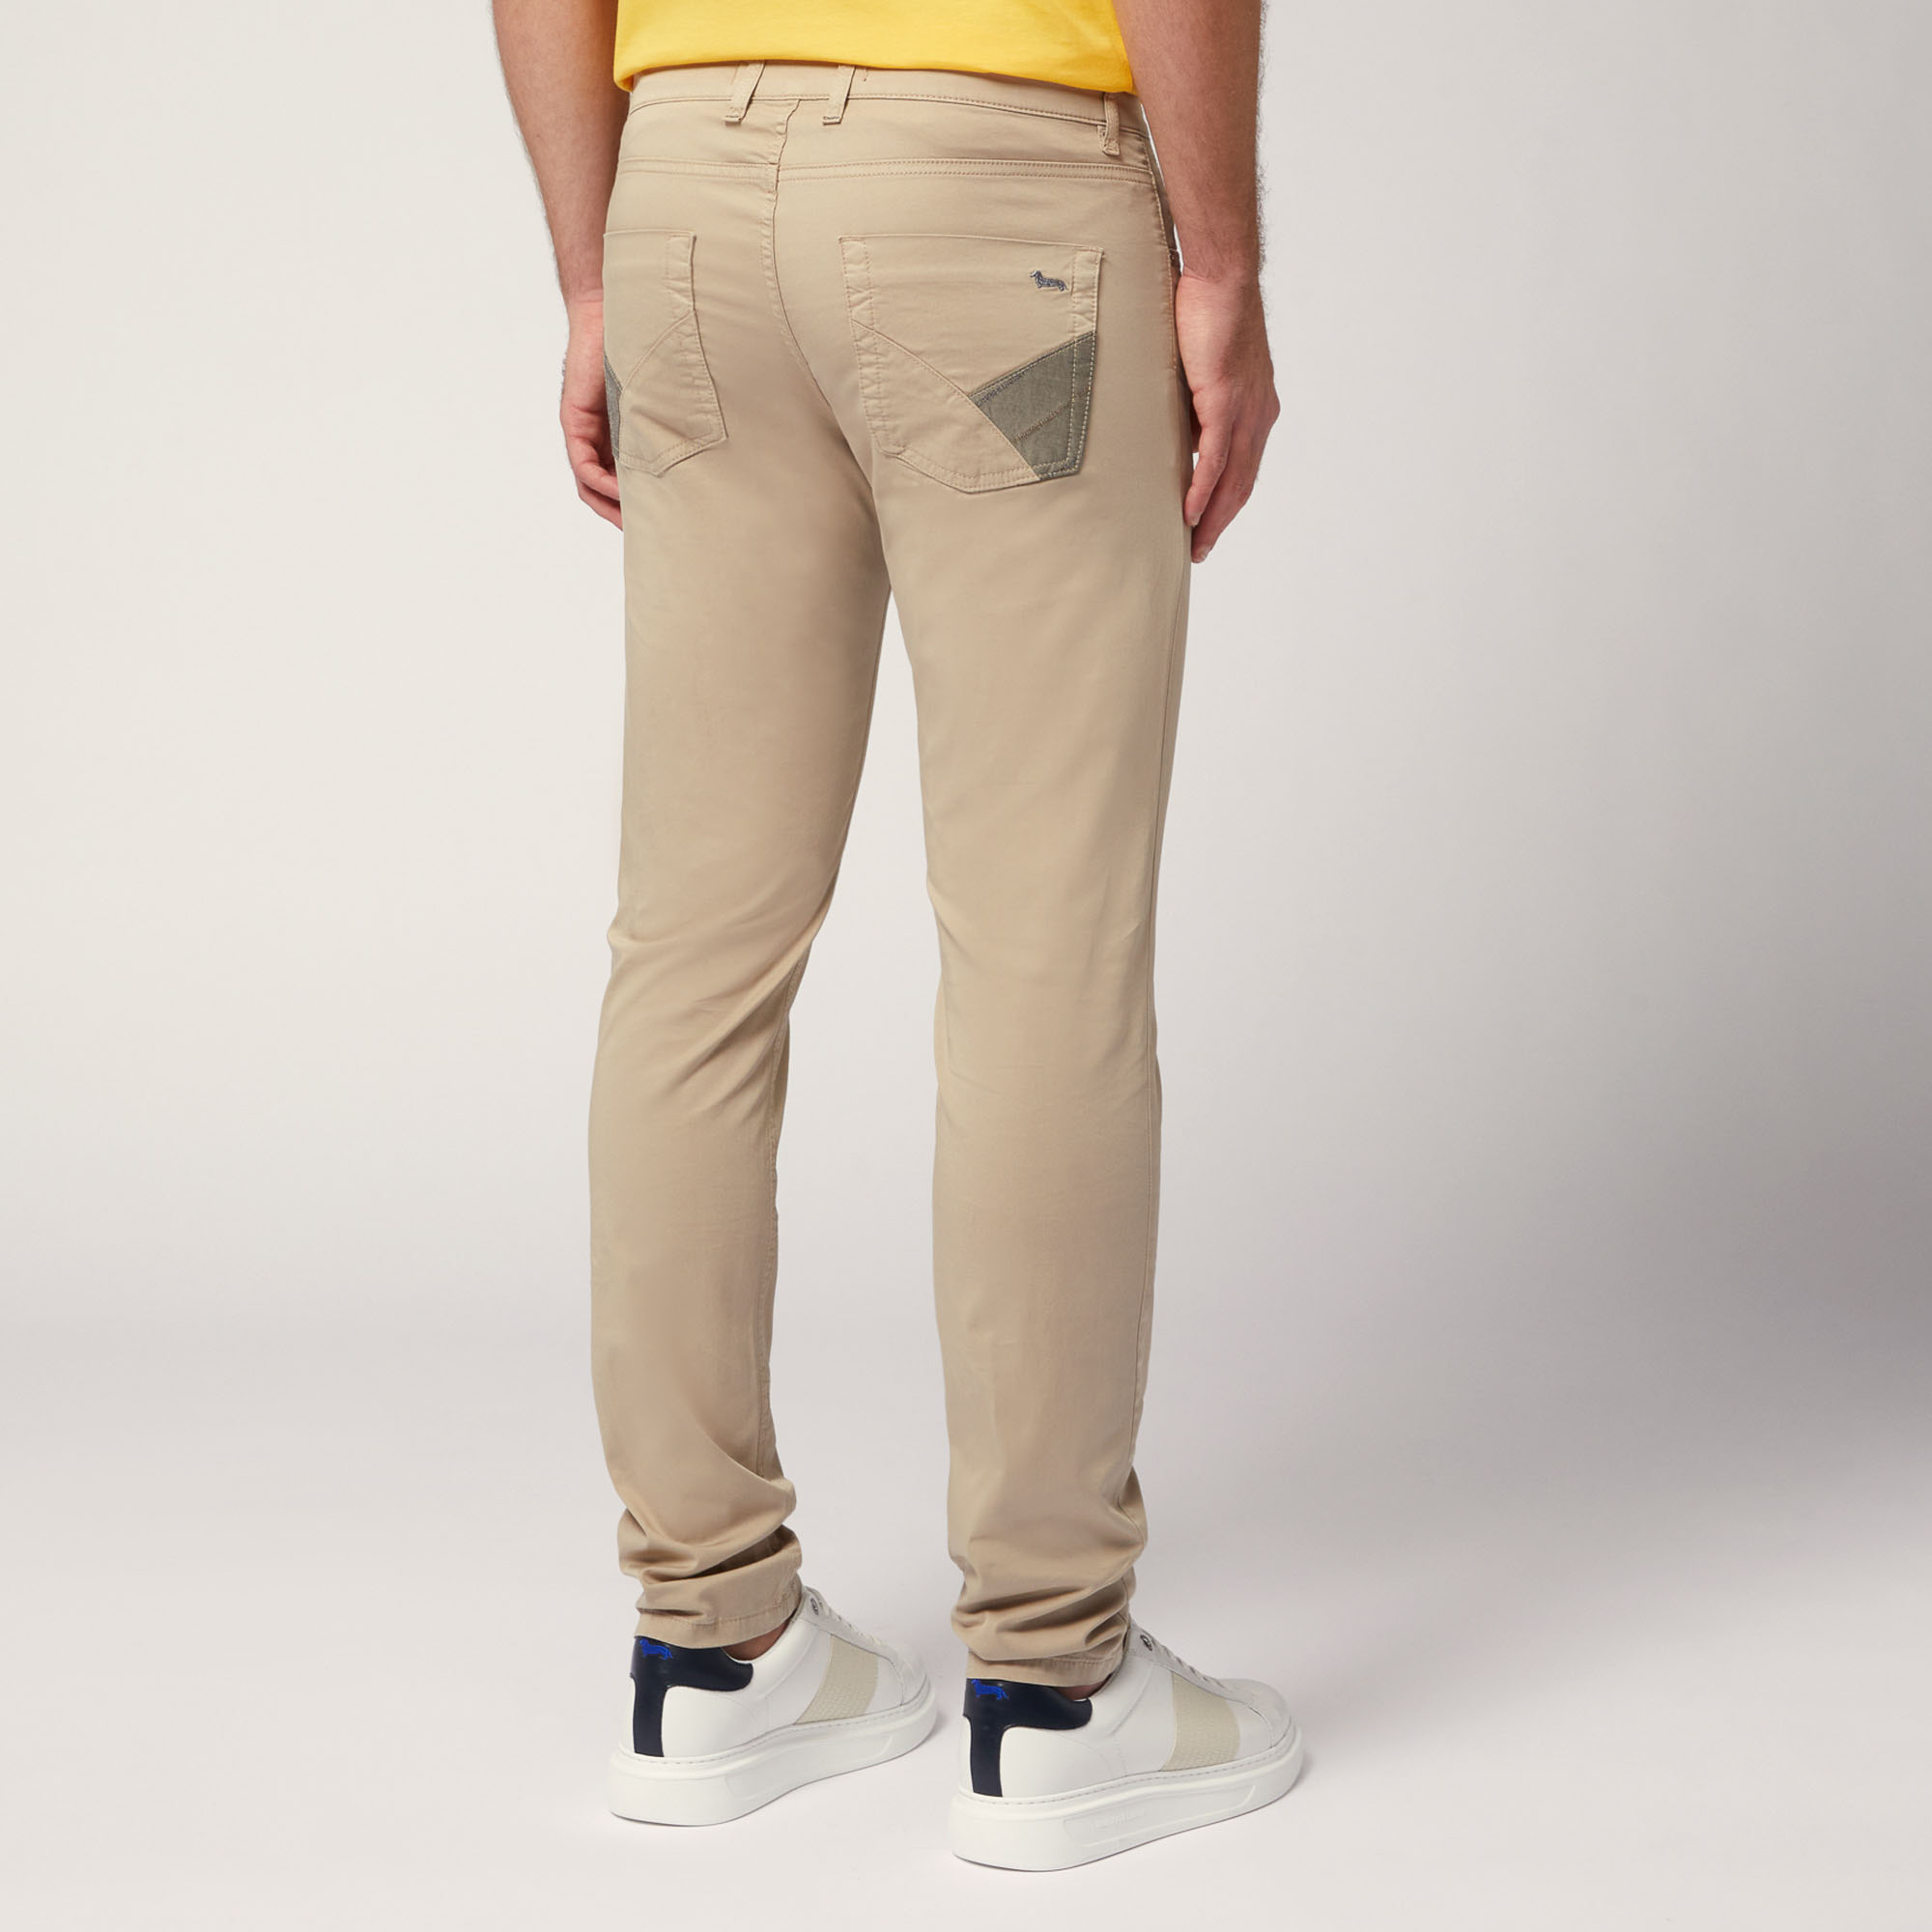 Pants with Inserts, Beige, large image number 1